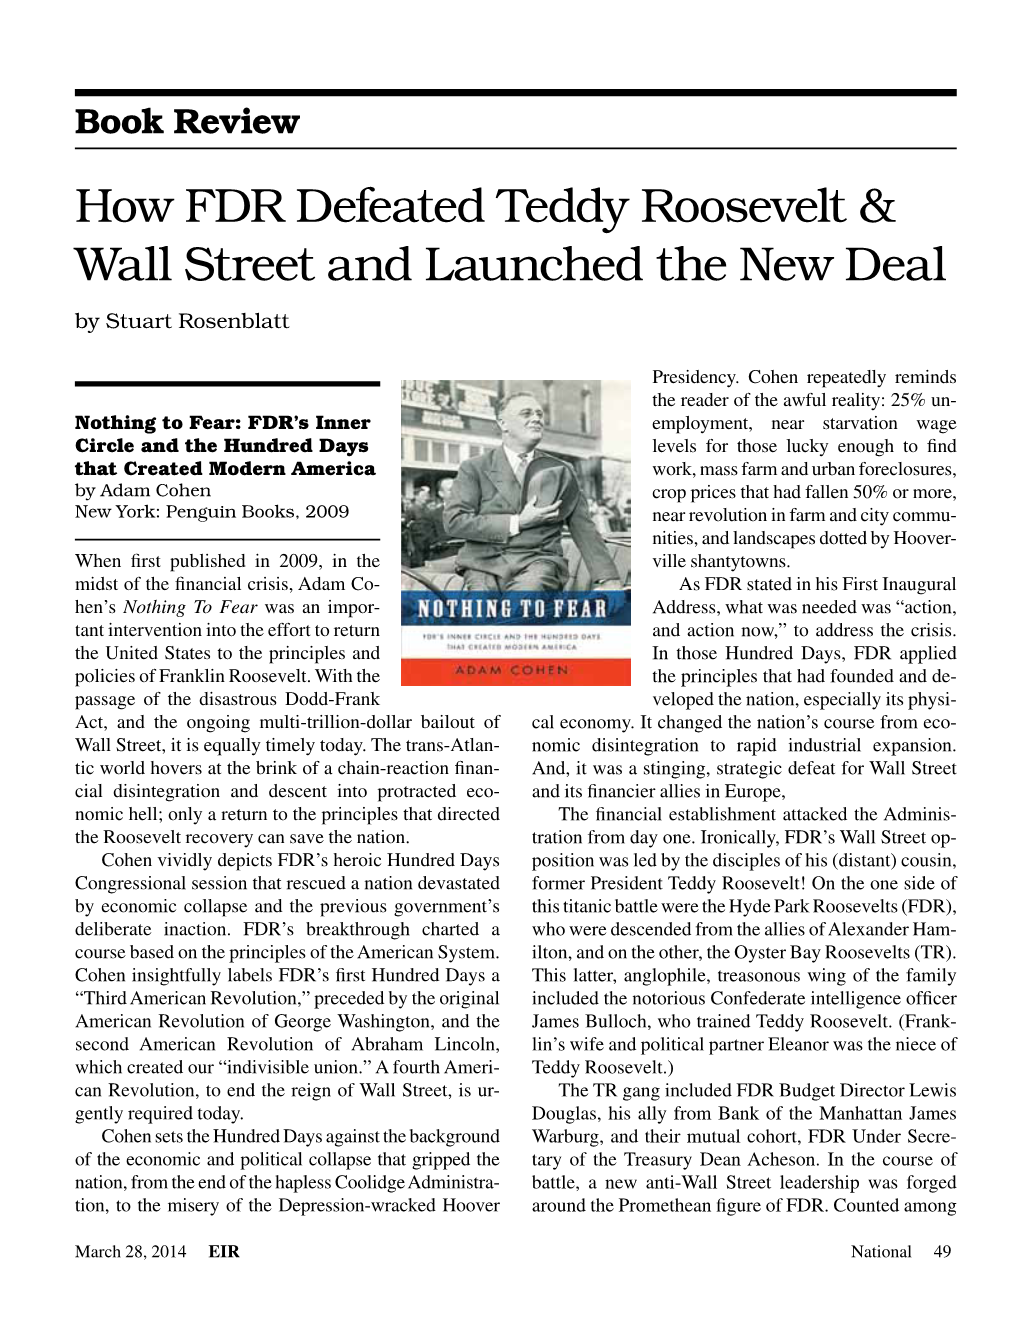 How FDR Defeated Teddy Roosevelt & Wall Street and Launched The